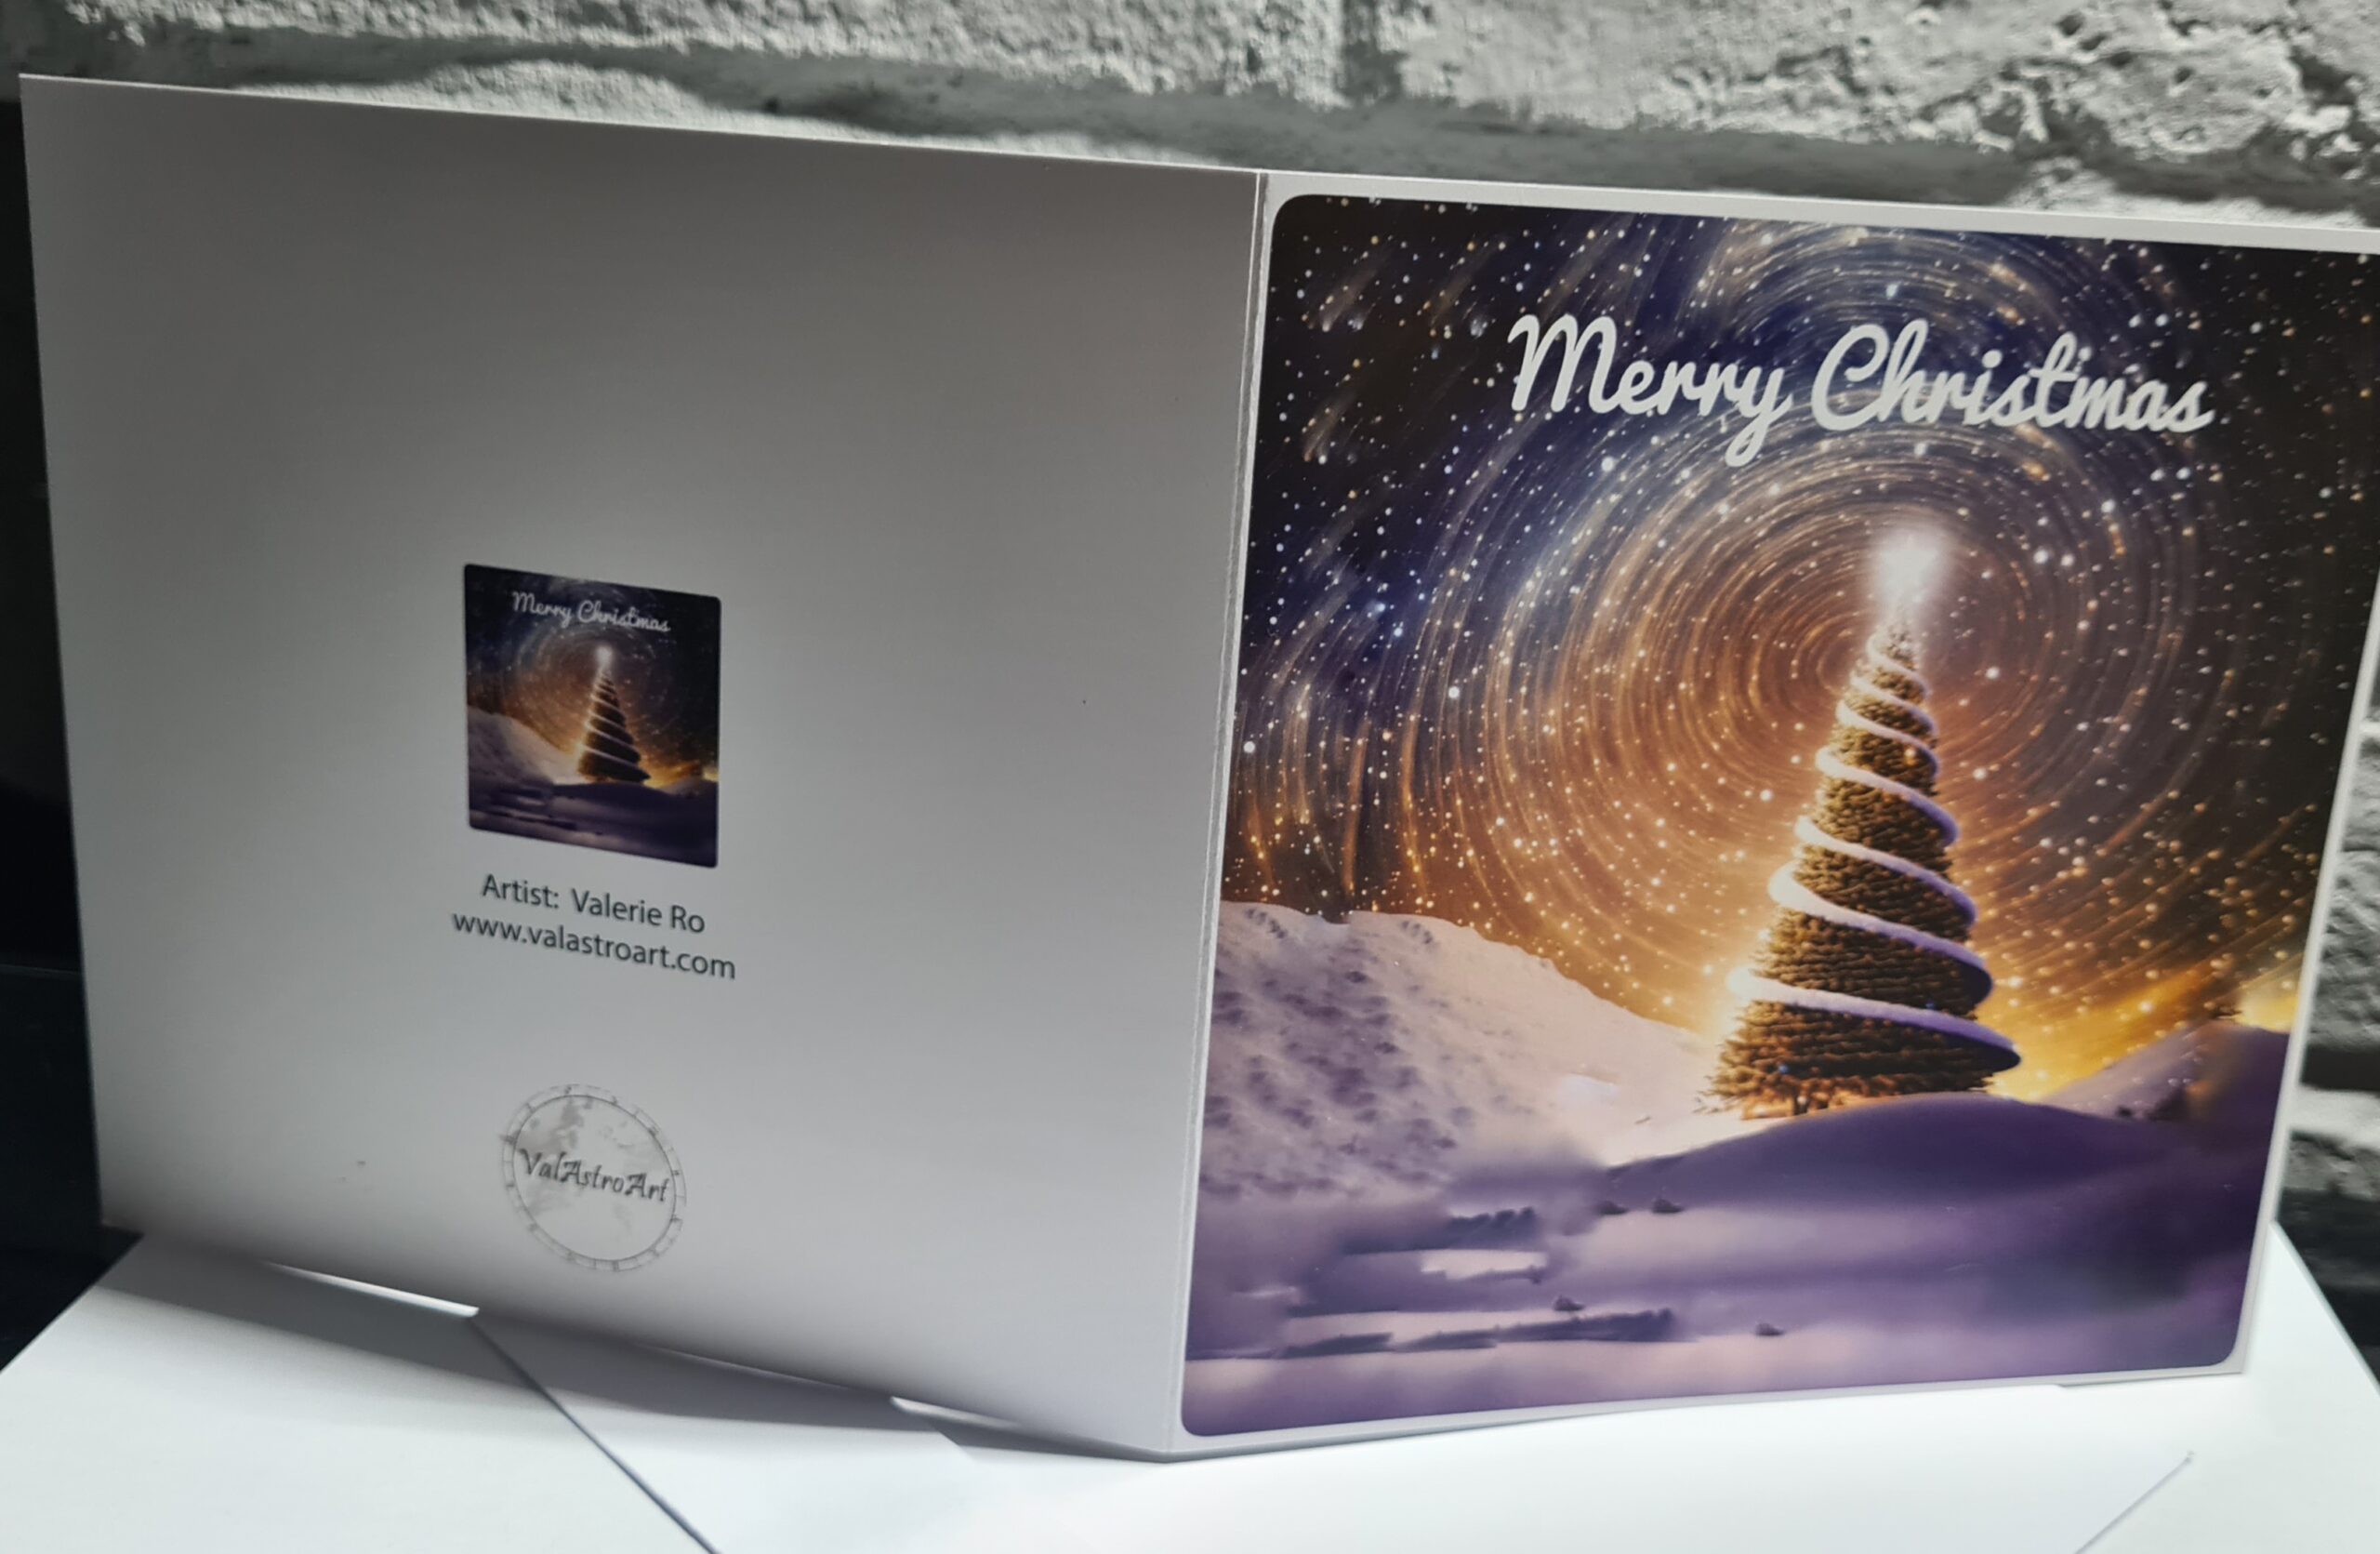 Experience the magic of the season with our Christmas cards, now available for purchase!